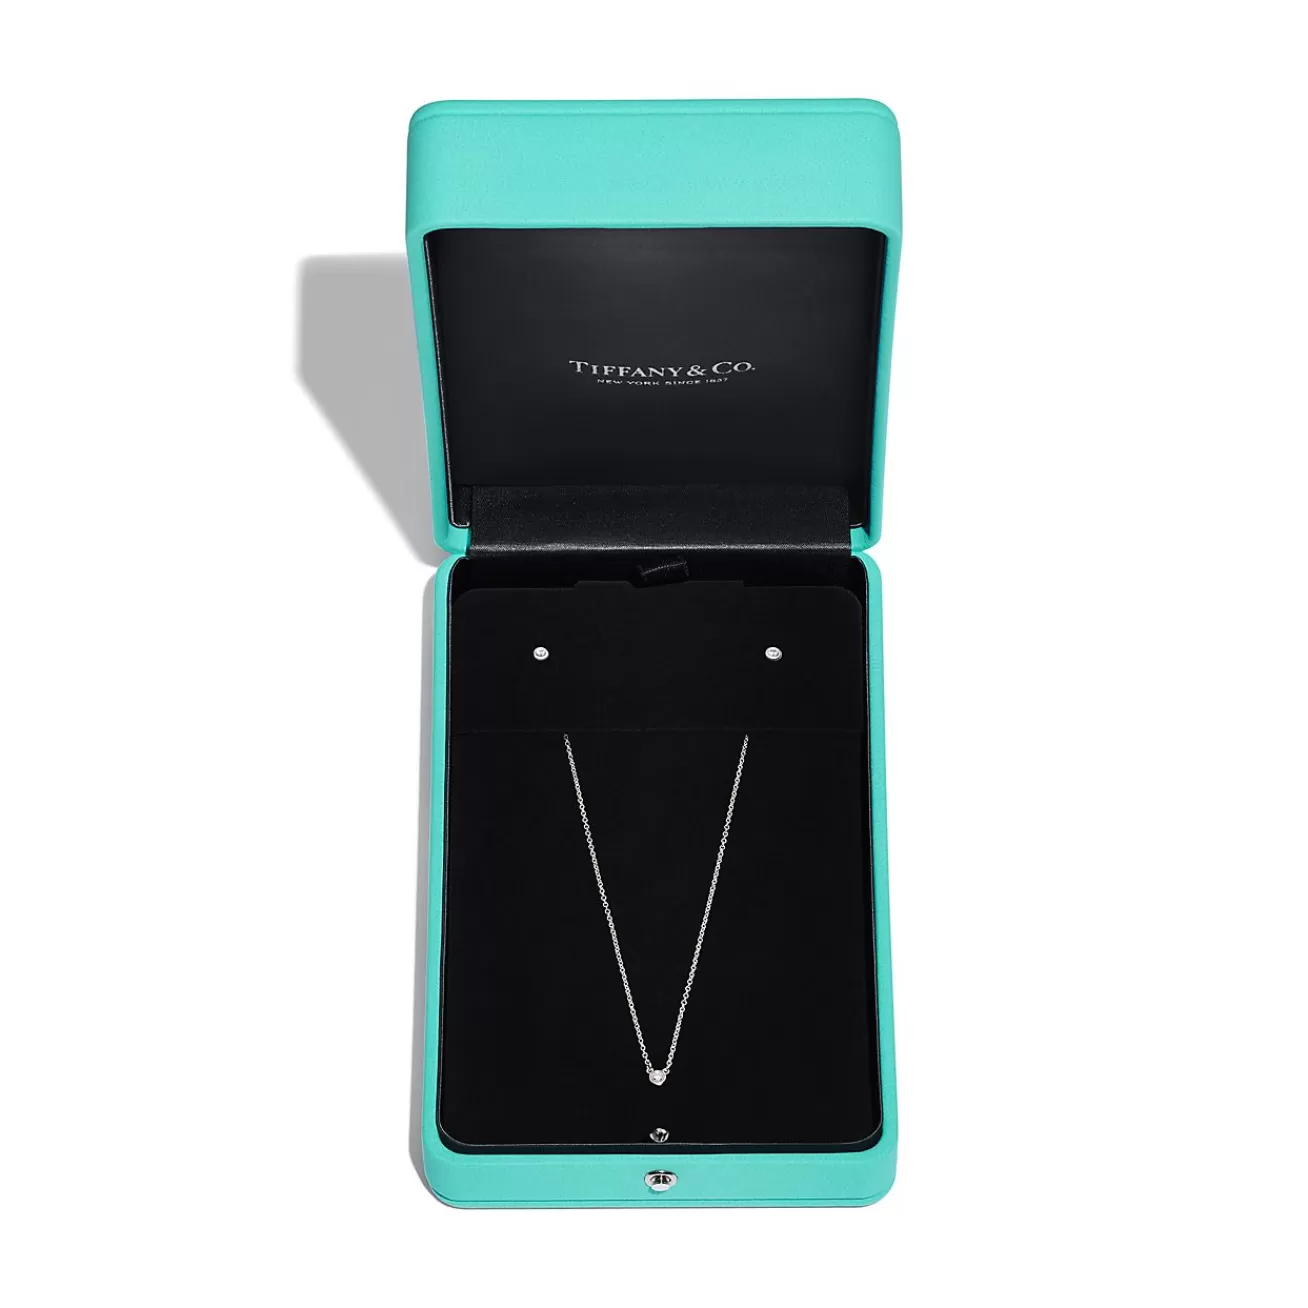 Tiffany & Co. Elsa Peretti® Diamonds by the Yard® Pendant and Earrings Set in Sterling Silver | ^ Sterling Silver Jewelry | Elsa Peretti®